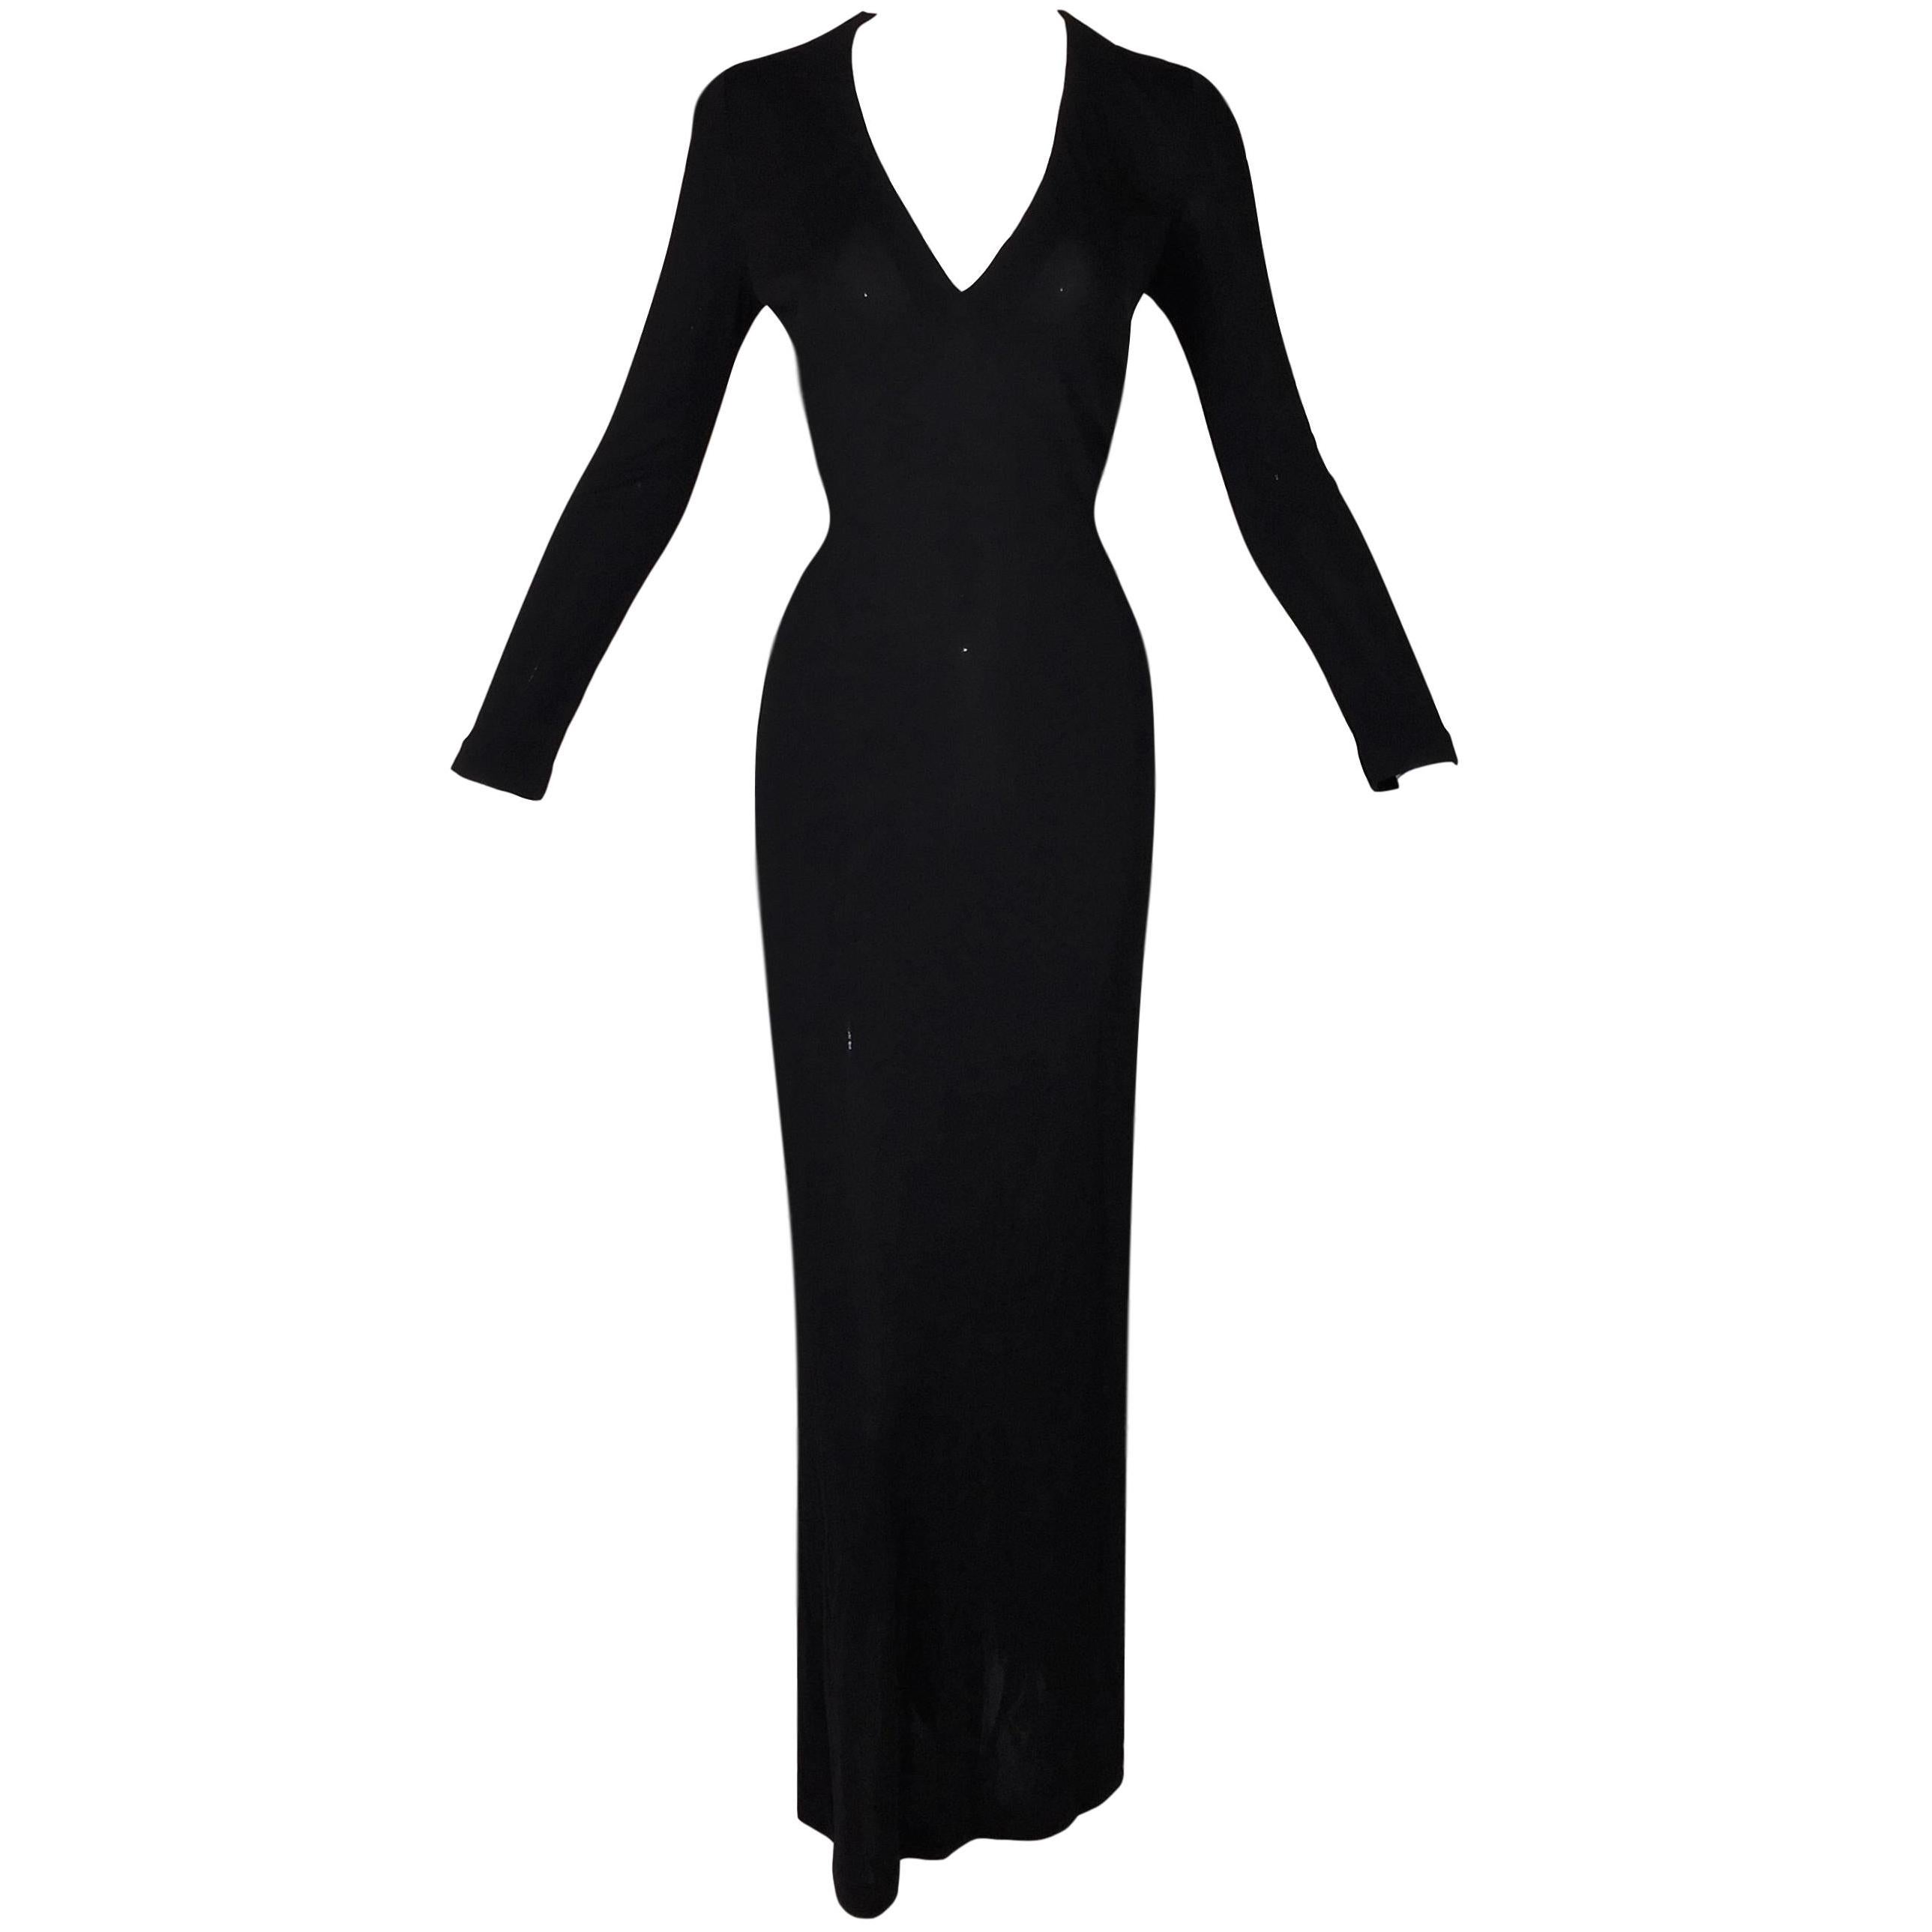 Gucci by Tom Ford Plunging Black L / S Gown Dress, 1996 